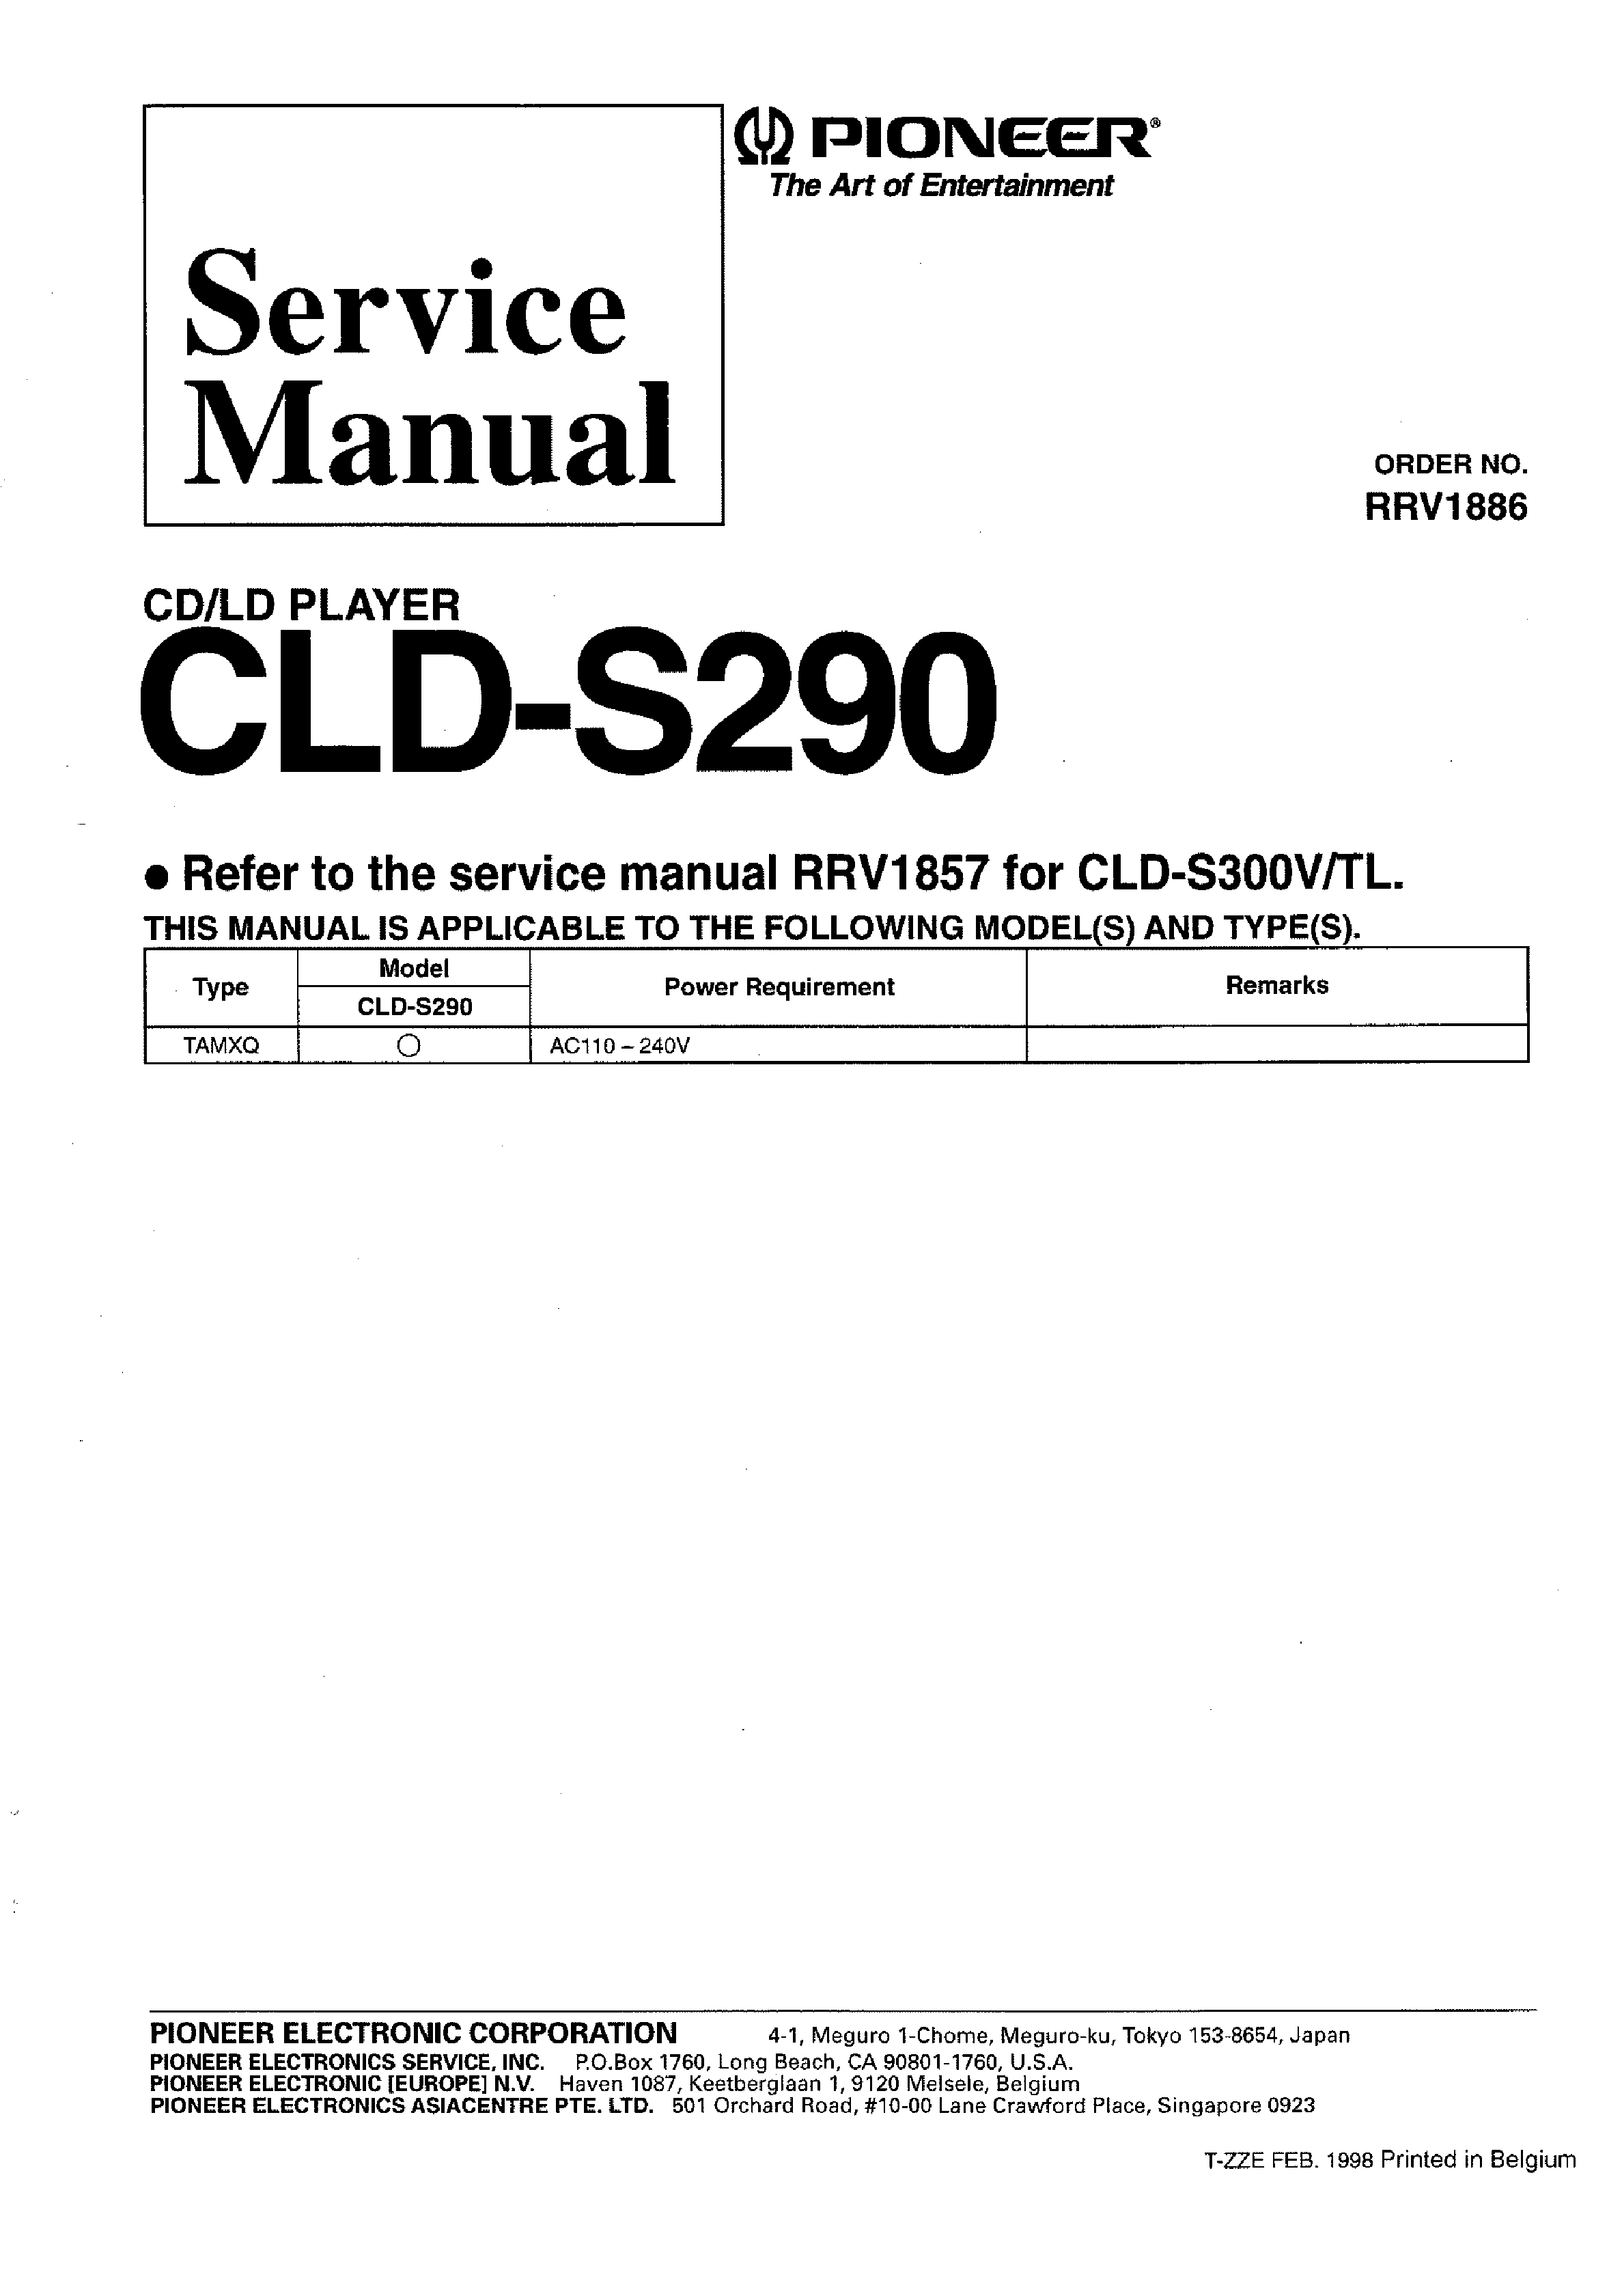 PIONEER CLD-S290 RRV1886 SM service manual (1st page)